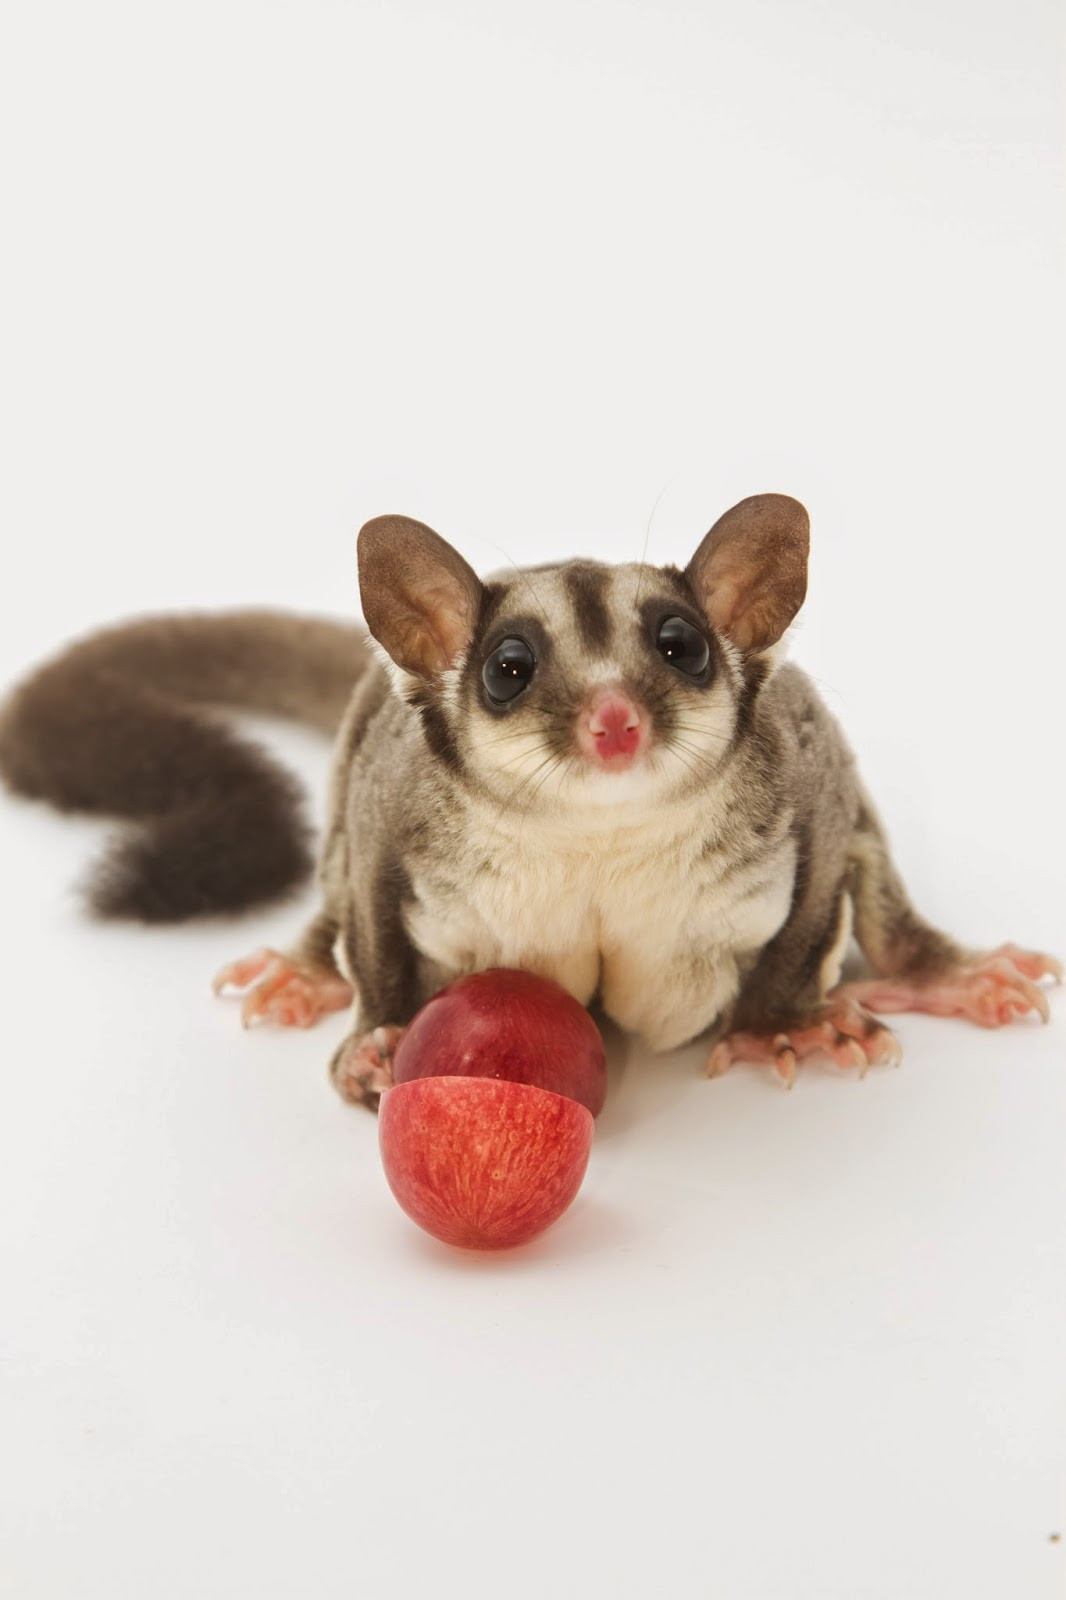 Sugar Glider Recipes With Baby Food
 Exotic Nutrition Pet pany Introducing New Foods to